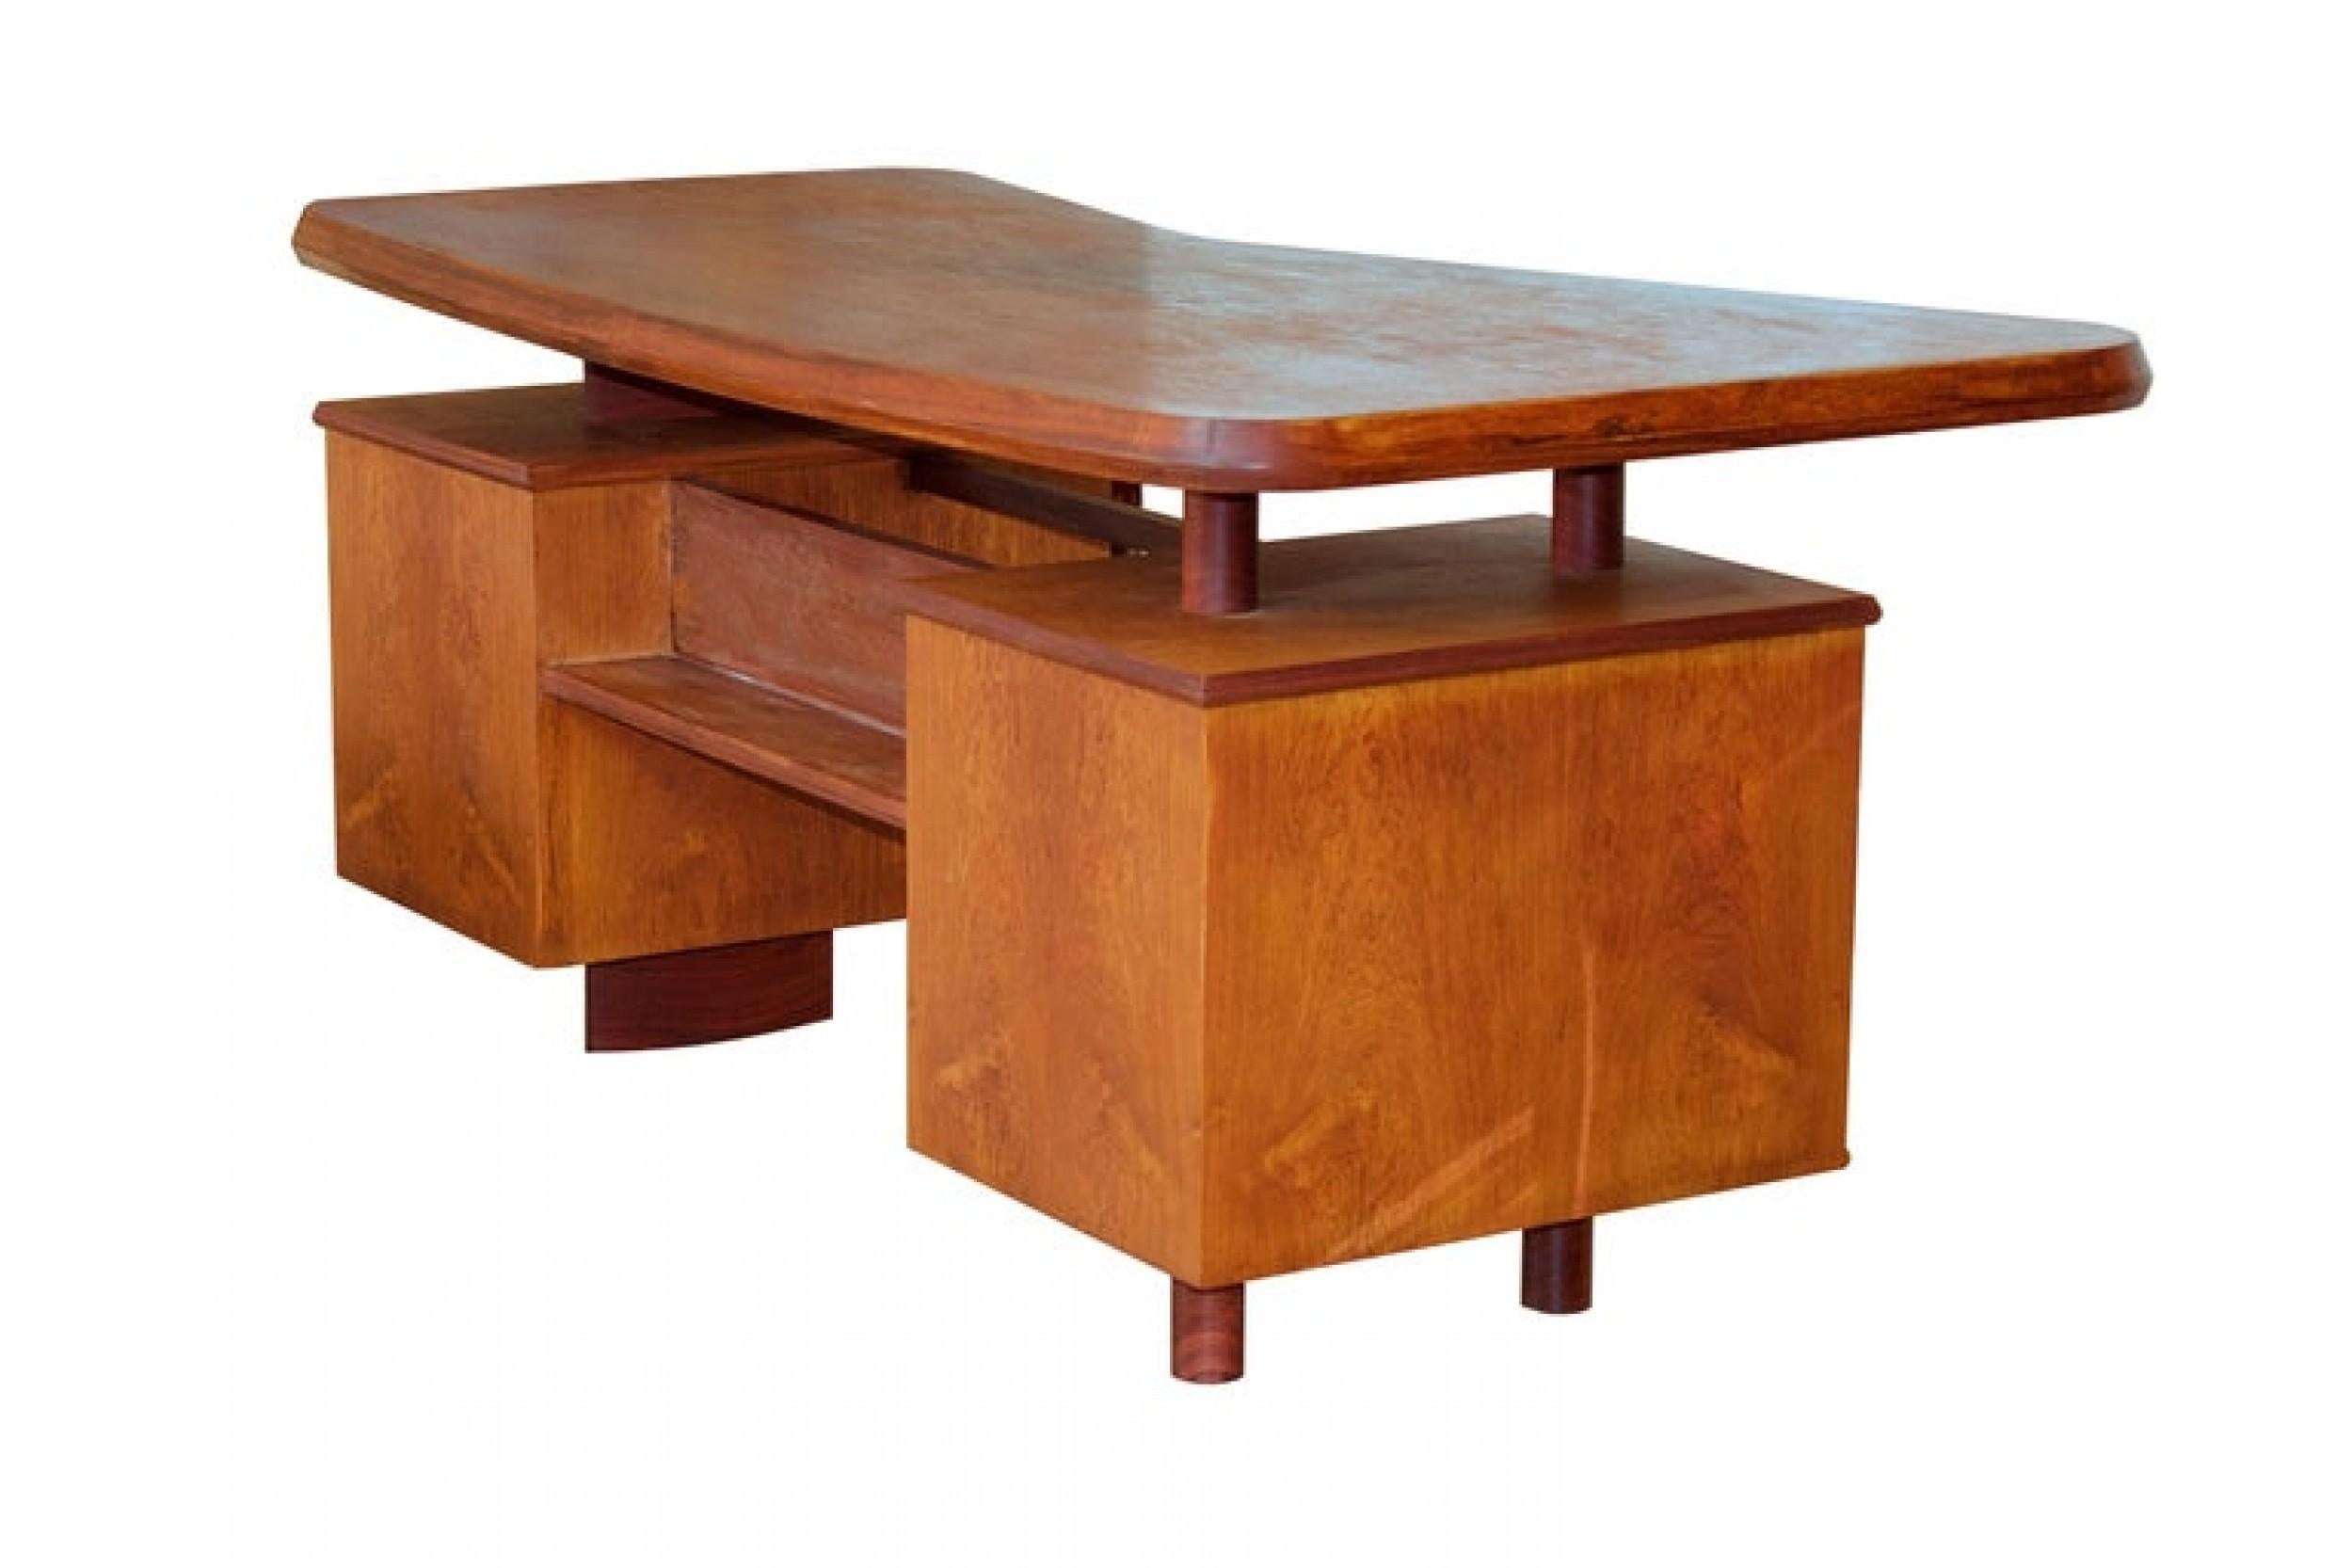 Unique French Modern Solid Rosewood Desk, Pierre Chapo, 1950s For Sale 1